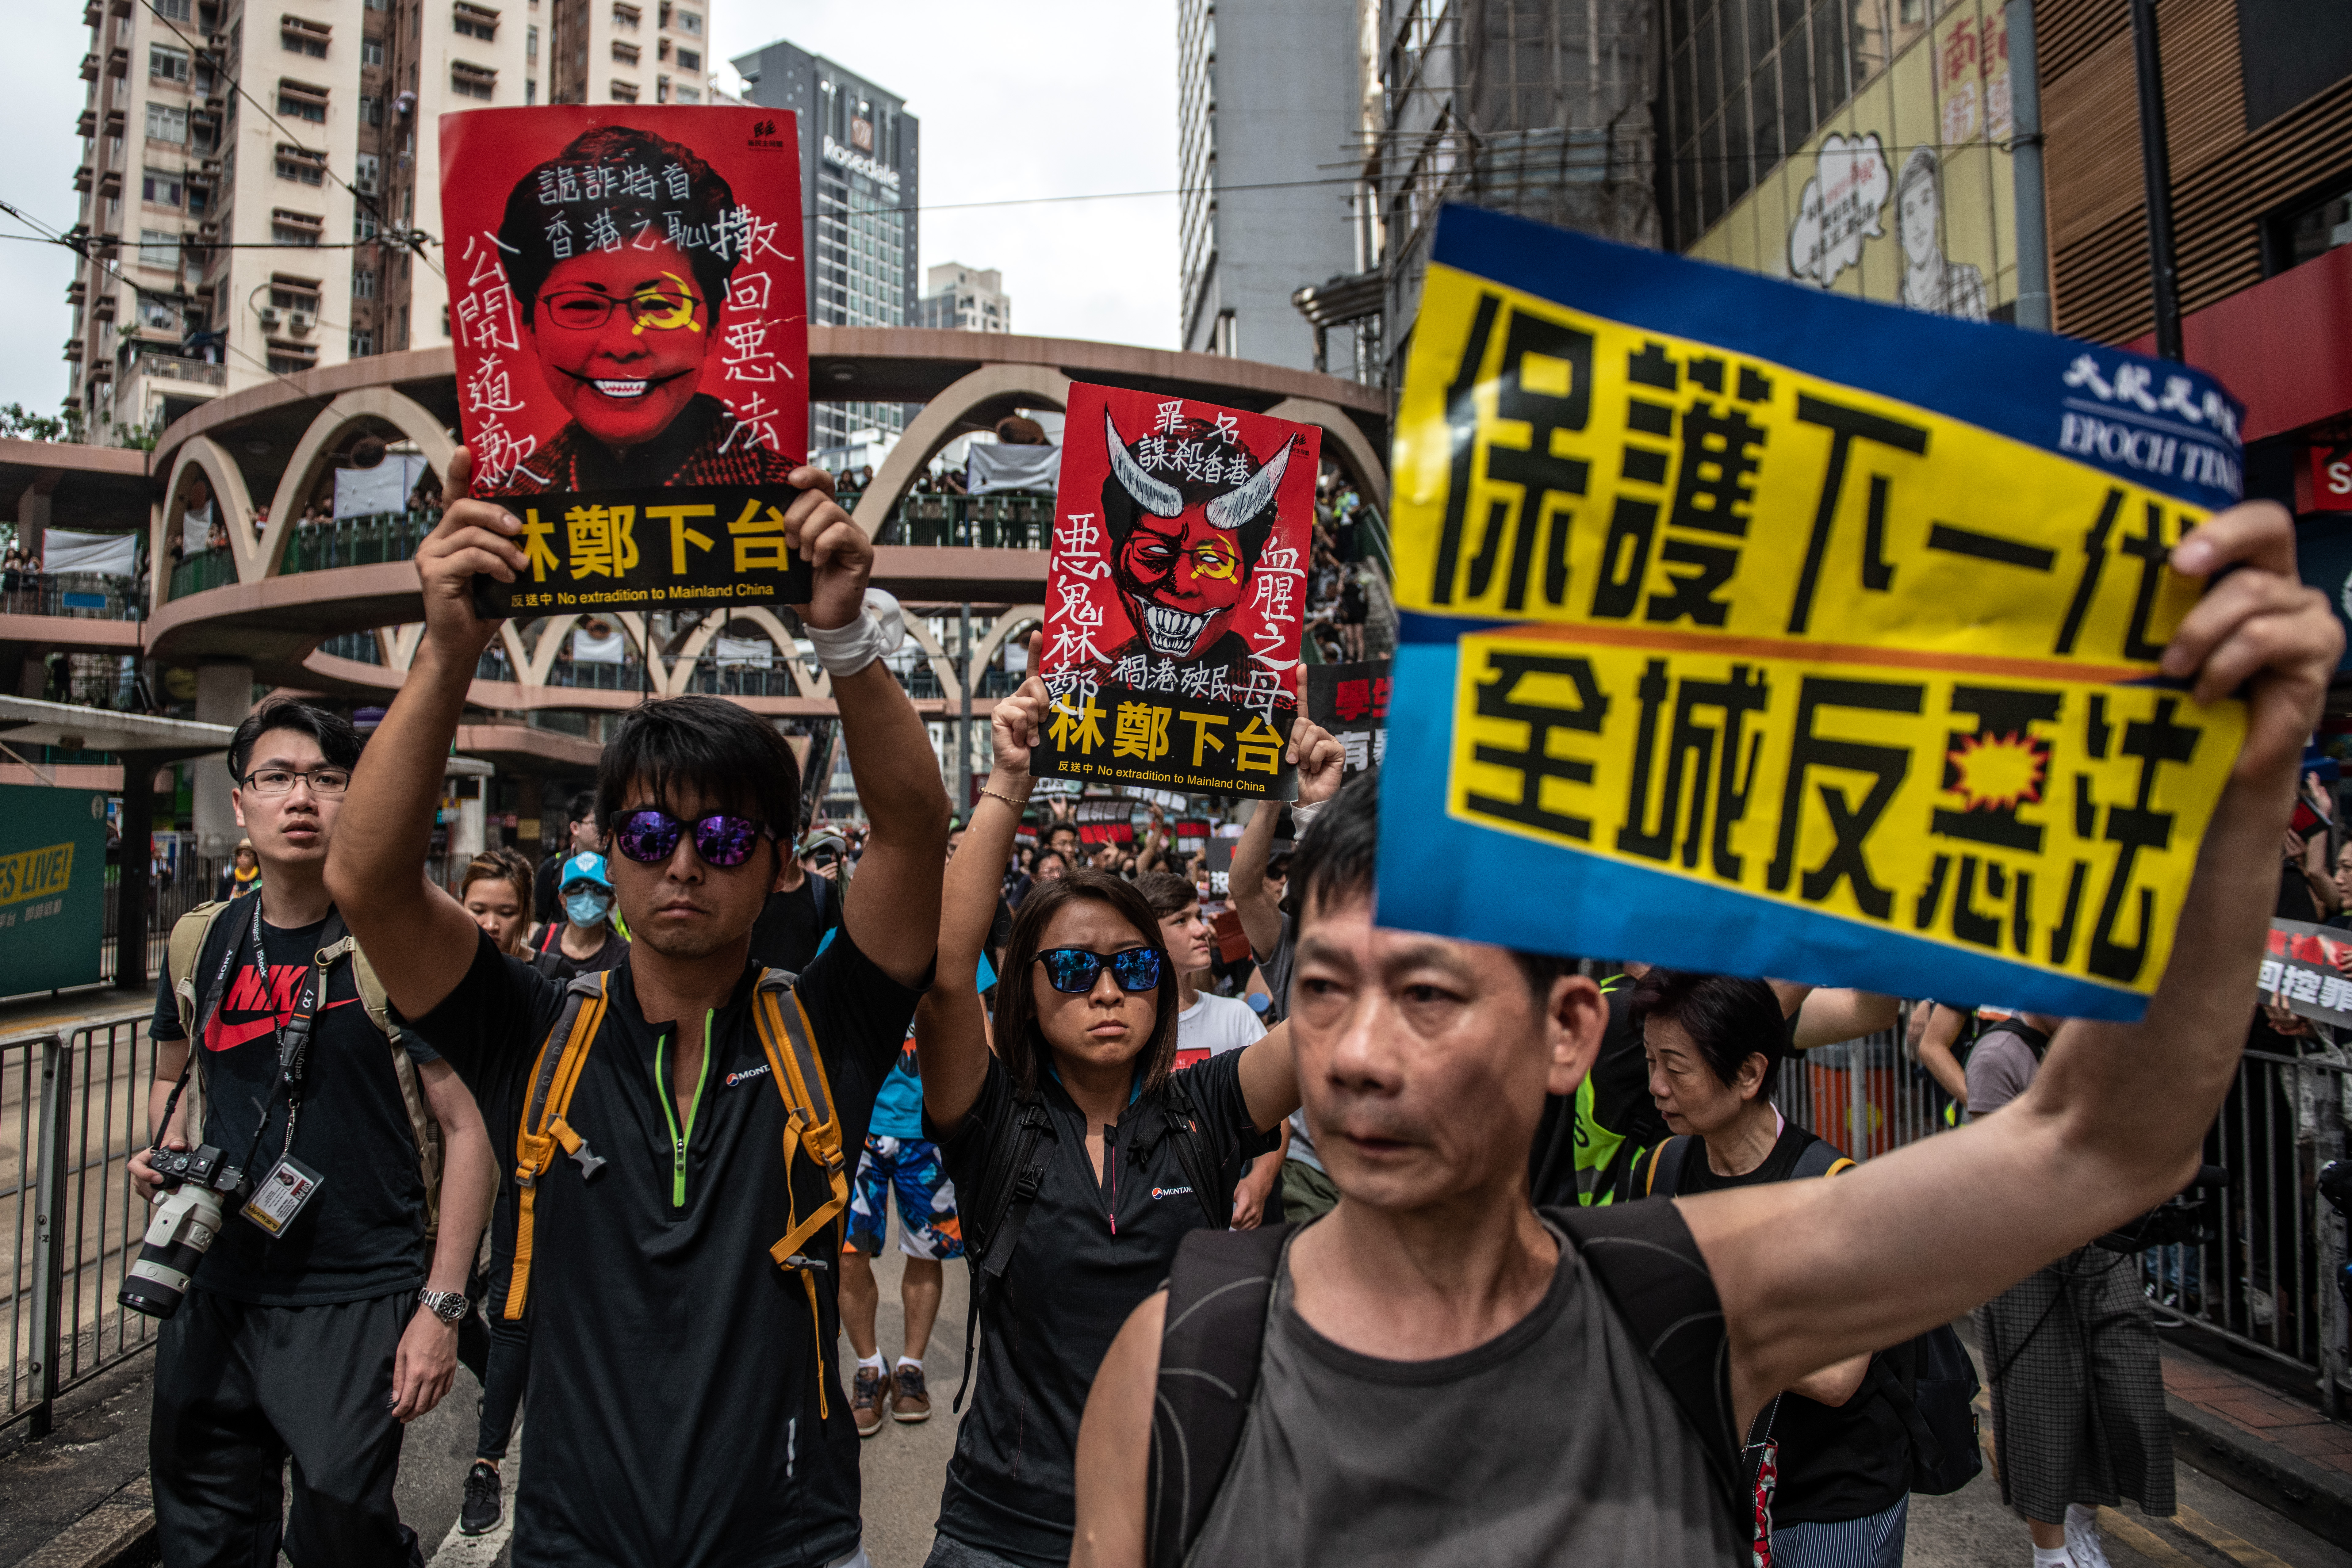 HONG KONG - JUNE 16: Protesters demonstrate against the now-suspended extradition bill on June 16, 2019 in Hong Kong. Large numbers of protesters rallied on Sunday despite an announcement yesterday by Hong Kong's Chief Executive Carrie Lam that the controversial extradition bill will be suspended indefinitely. (Photo by Carl Court/Getty Images)